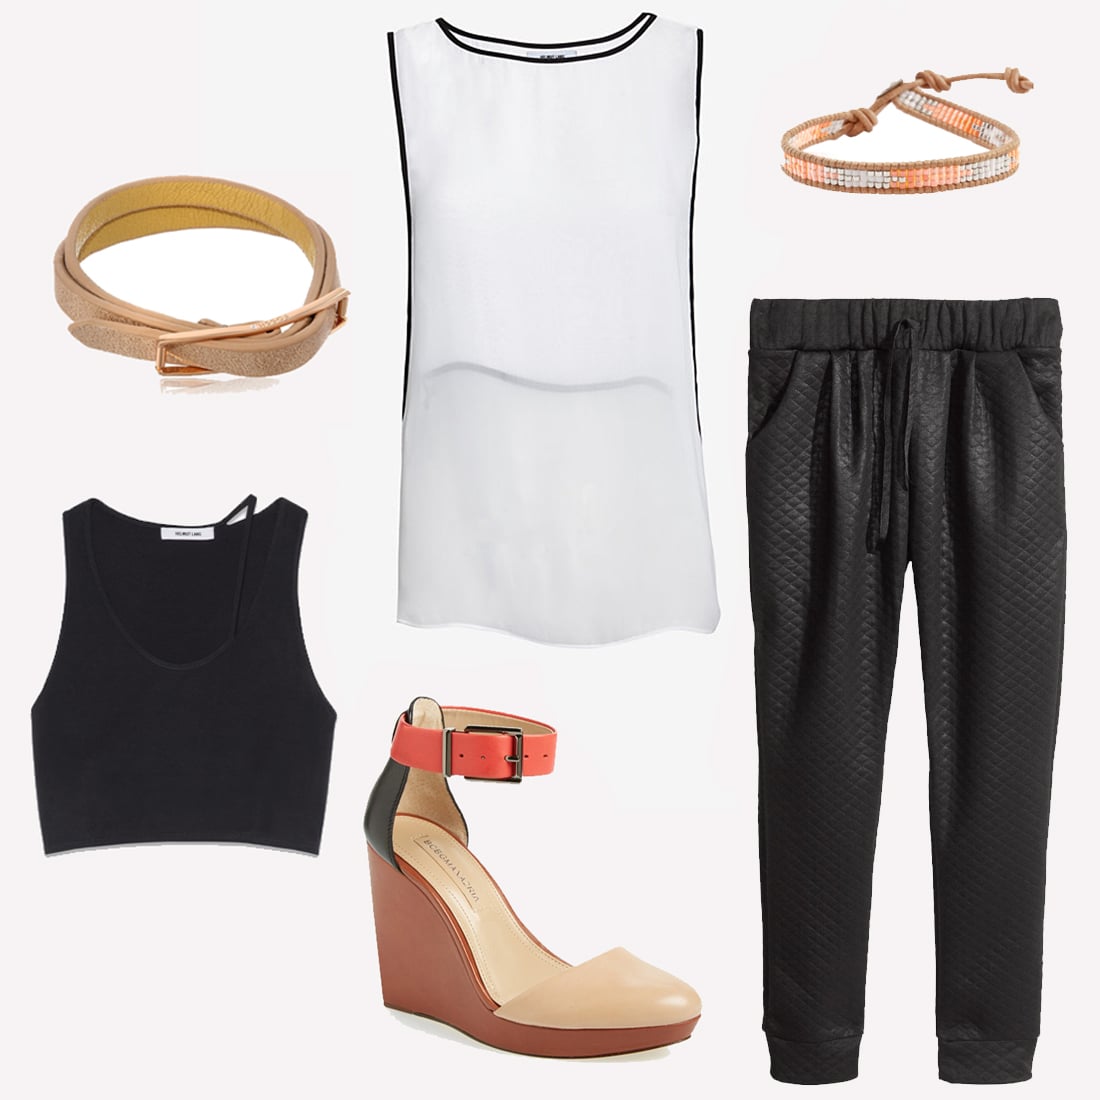 5 Ways To Wear A Crop Top To Work Without Offending HR - Betches